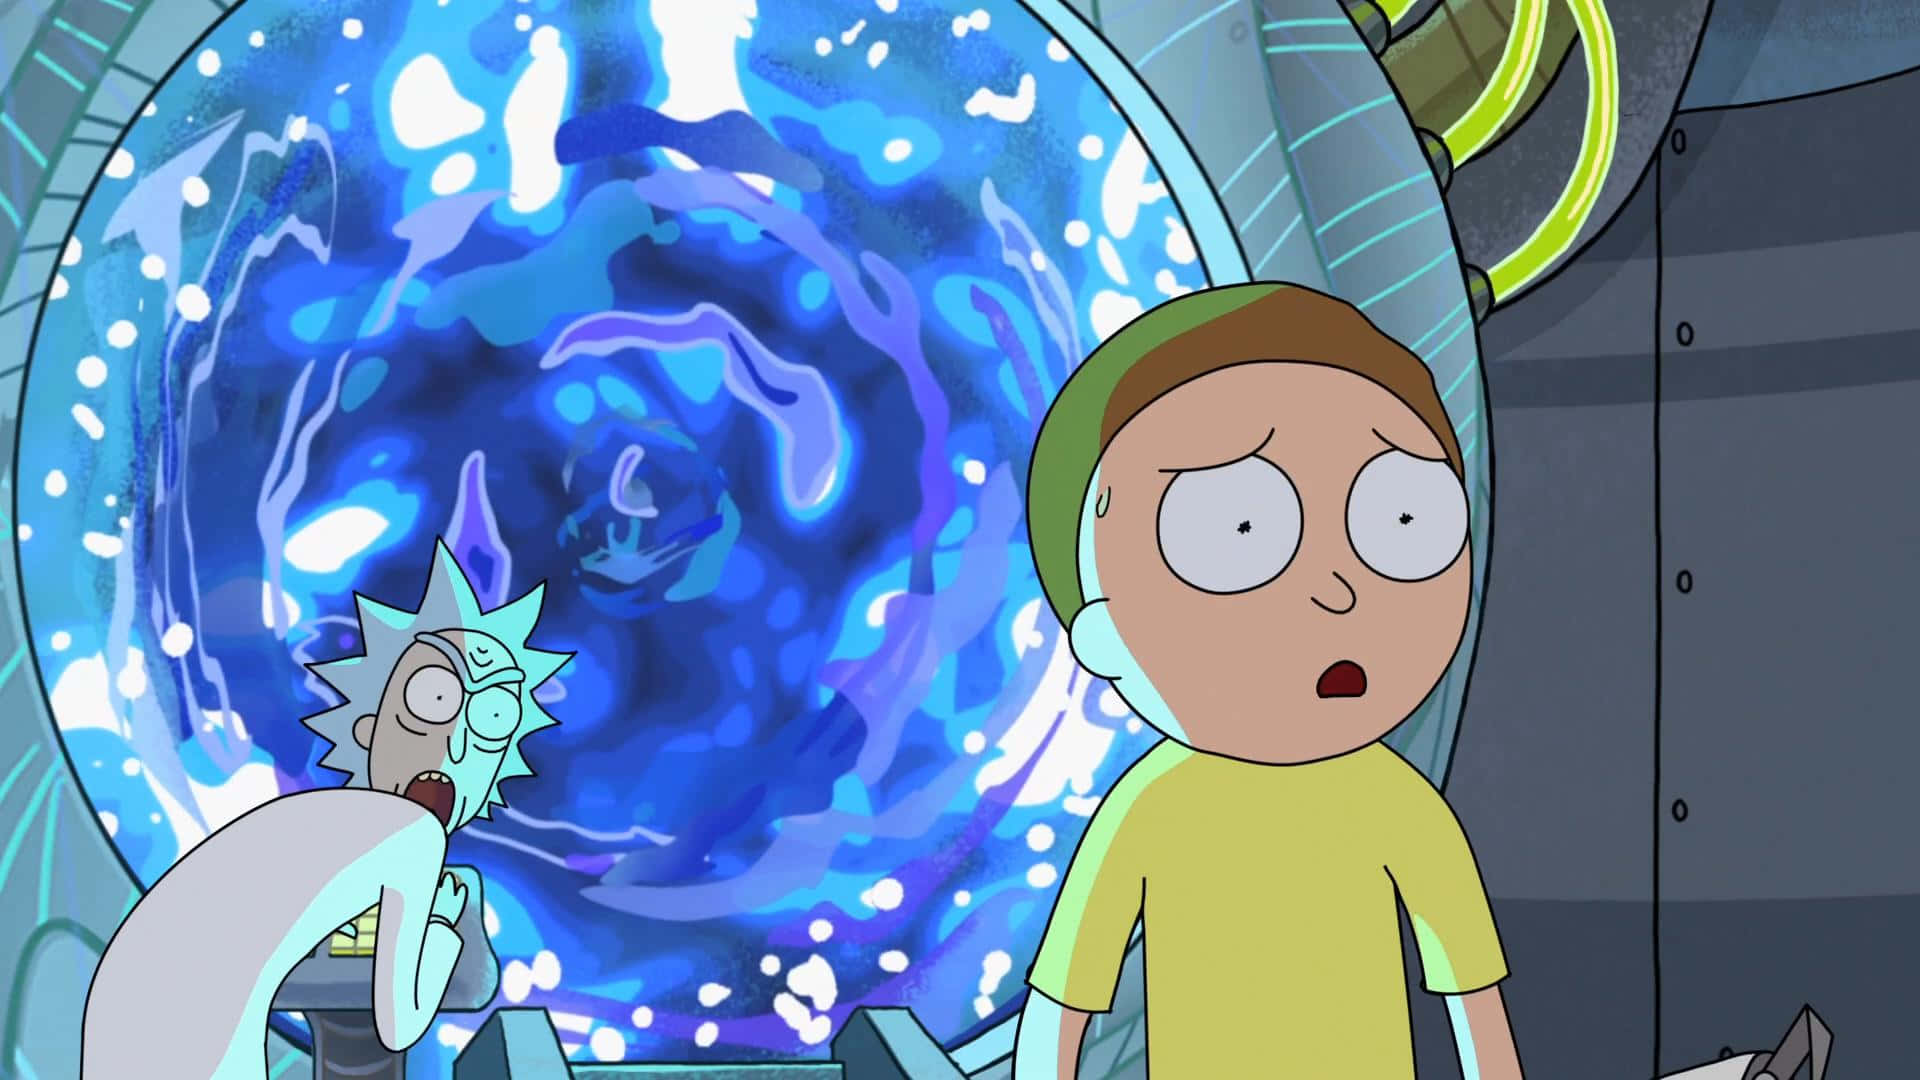 Experimentierenmit Rick Und Morty 1920x1080 Wallpaper